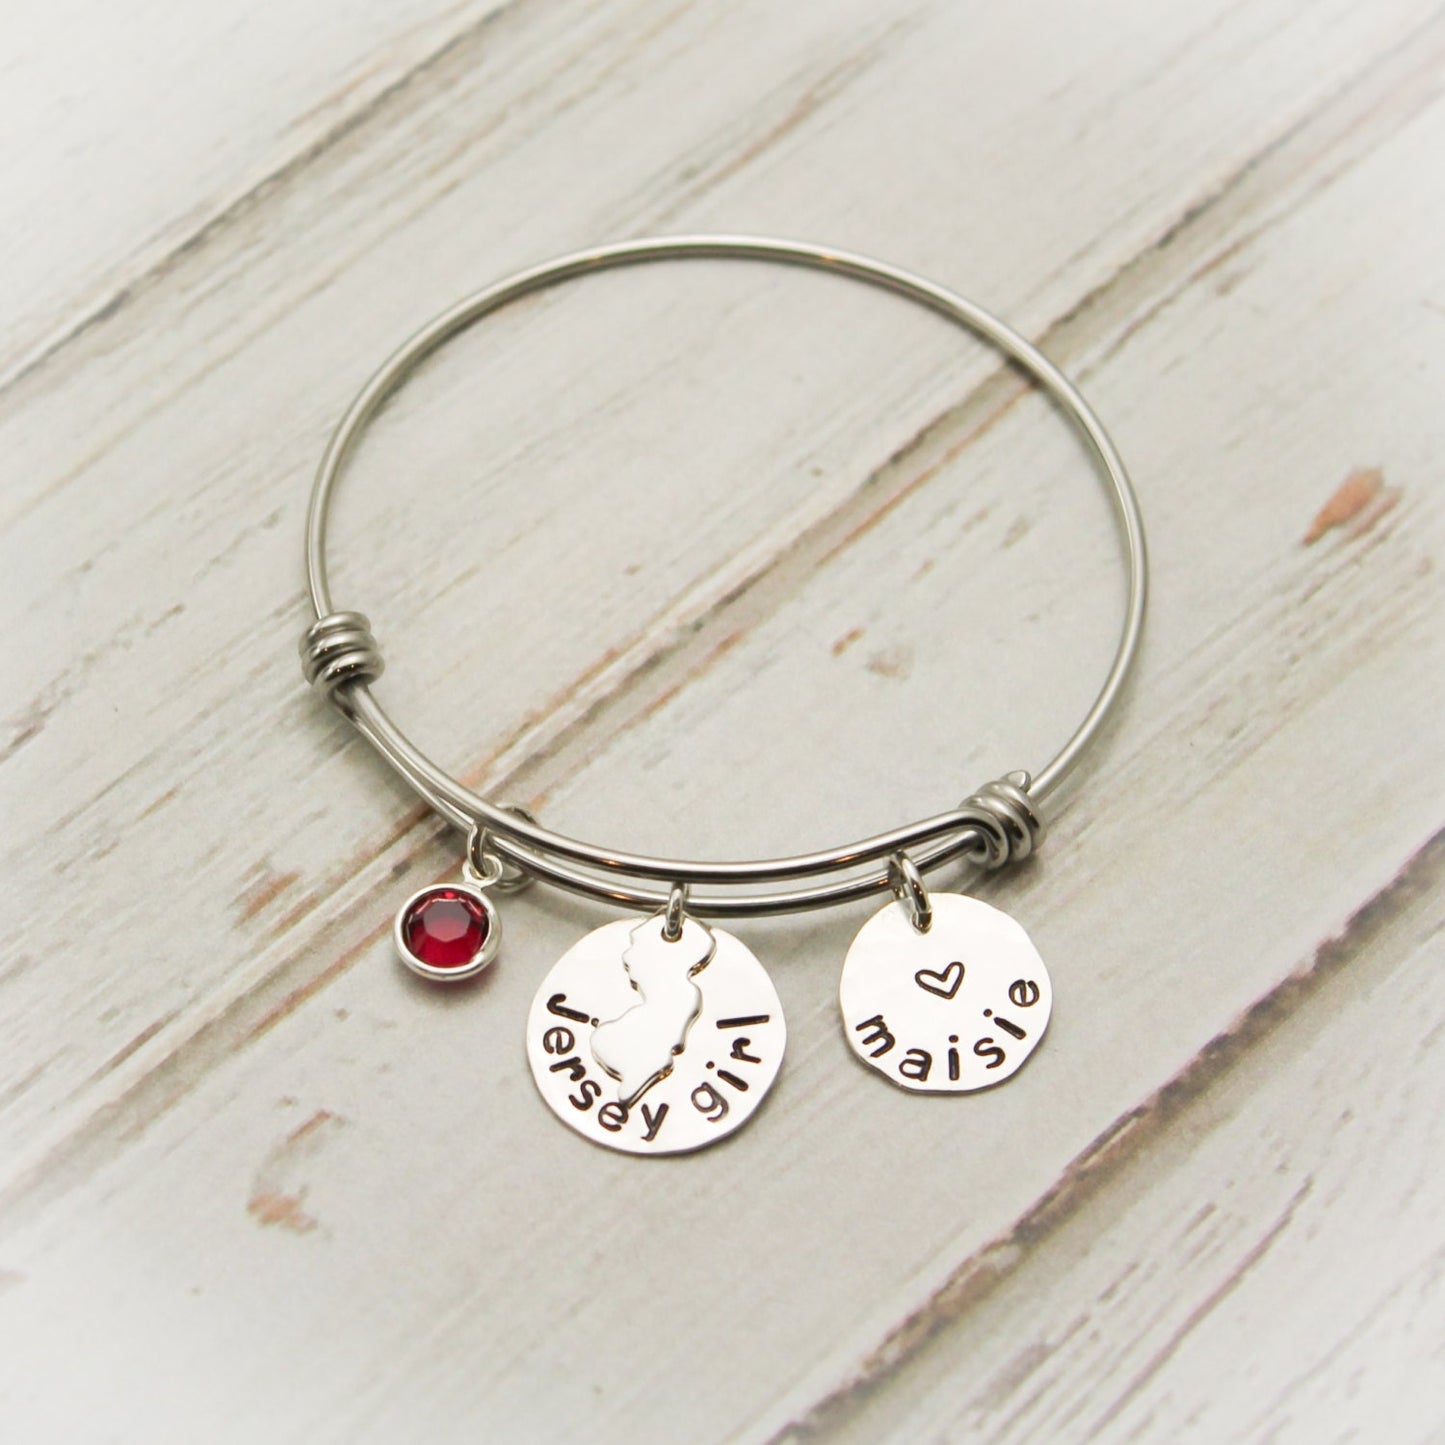 Jersey Girl Bangle Personalized Hand Stamped Jewelry